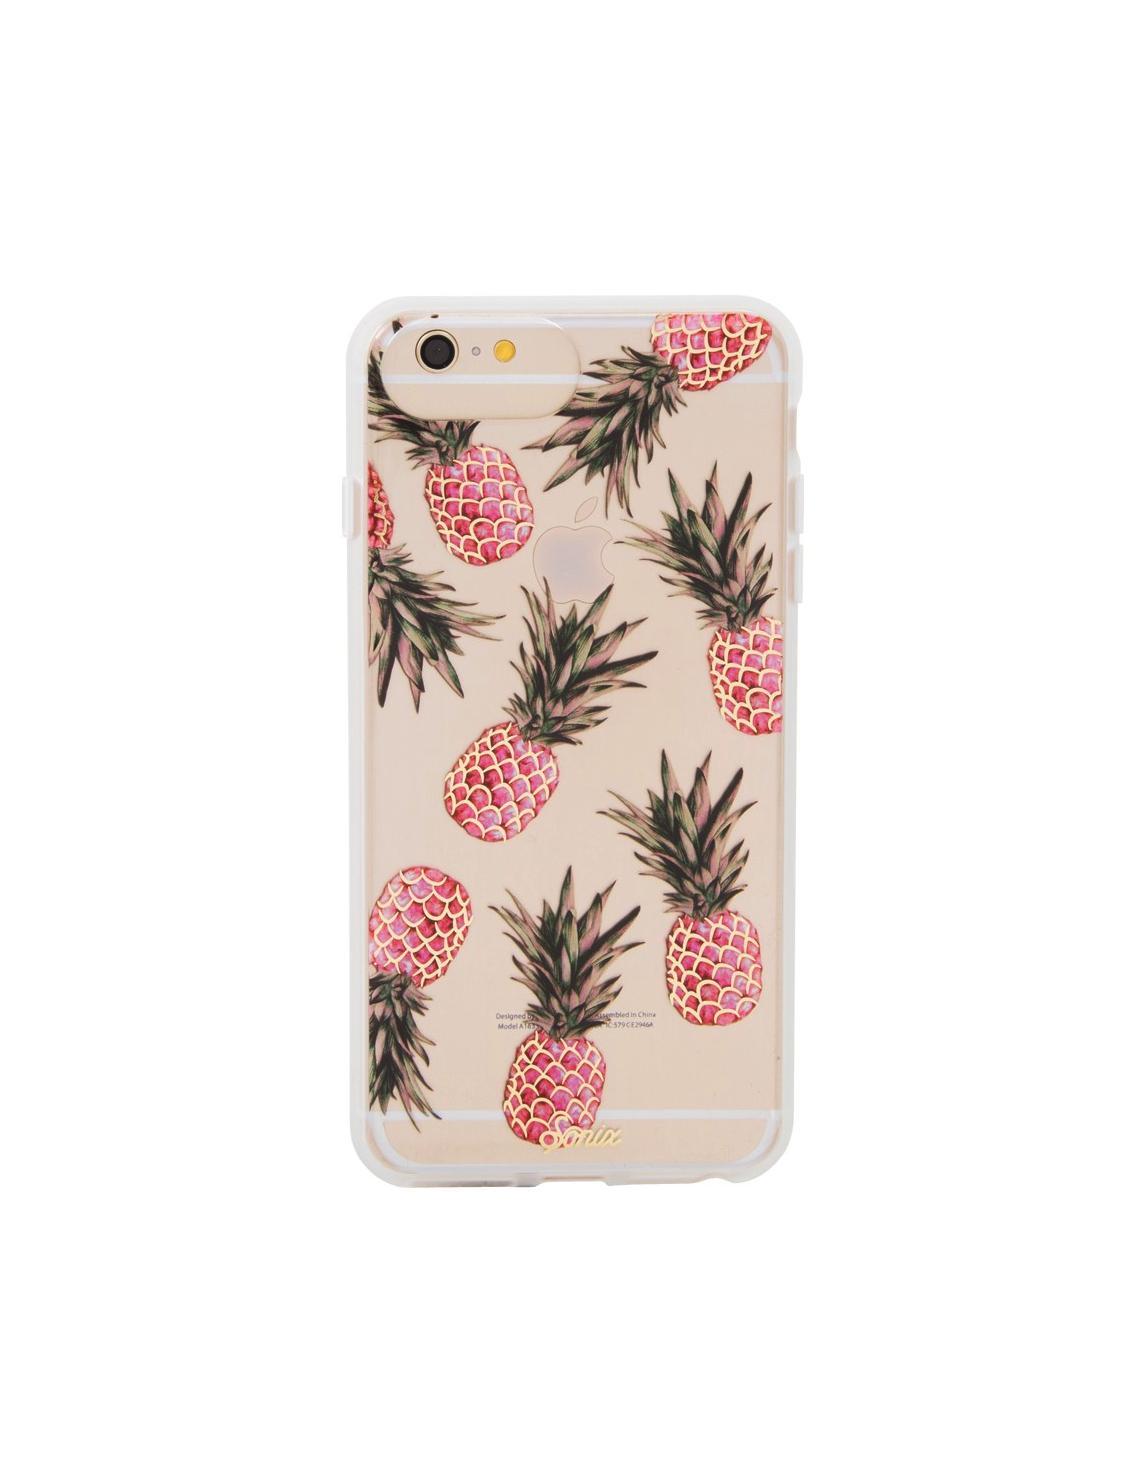 Women outfit in a phone case rental from Sonix called Piña Colada Phone Case